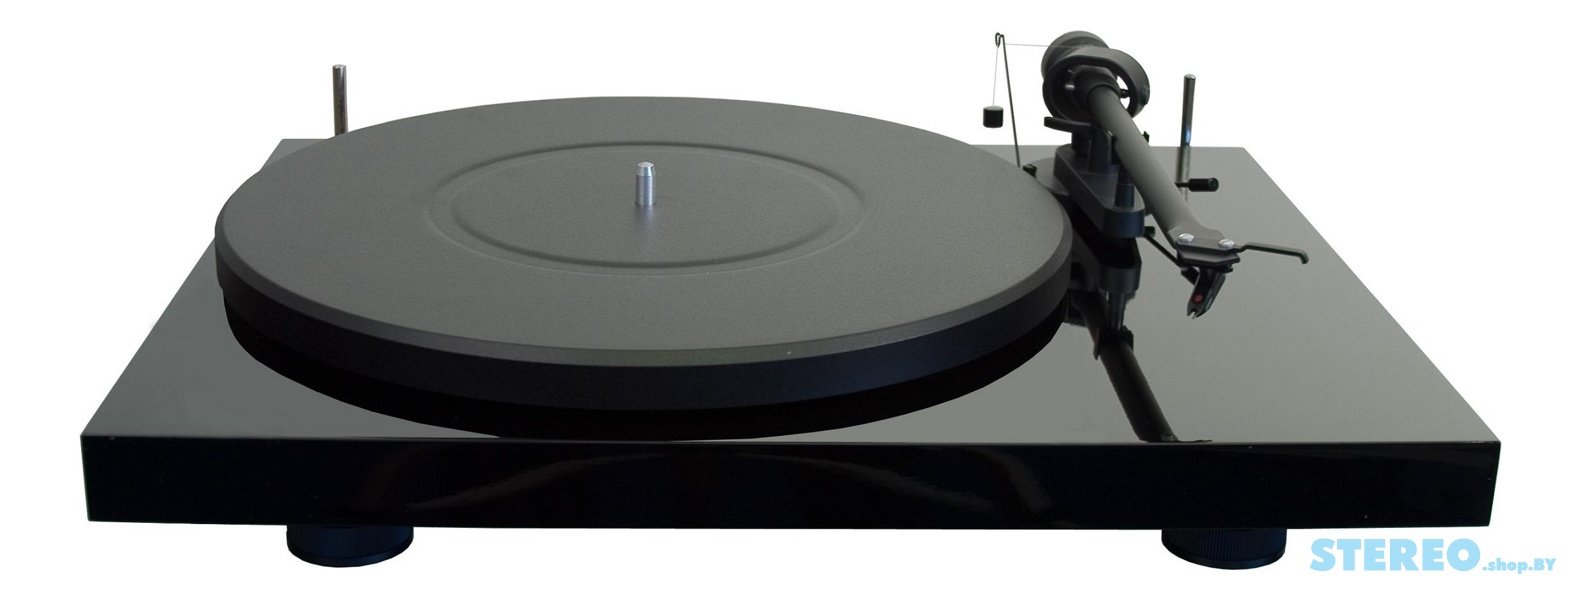 Pro-ject Debut CARBON PIANO BLACK